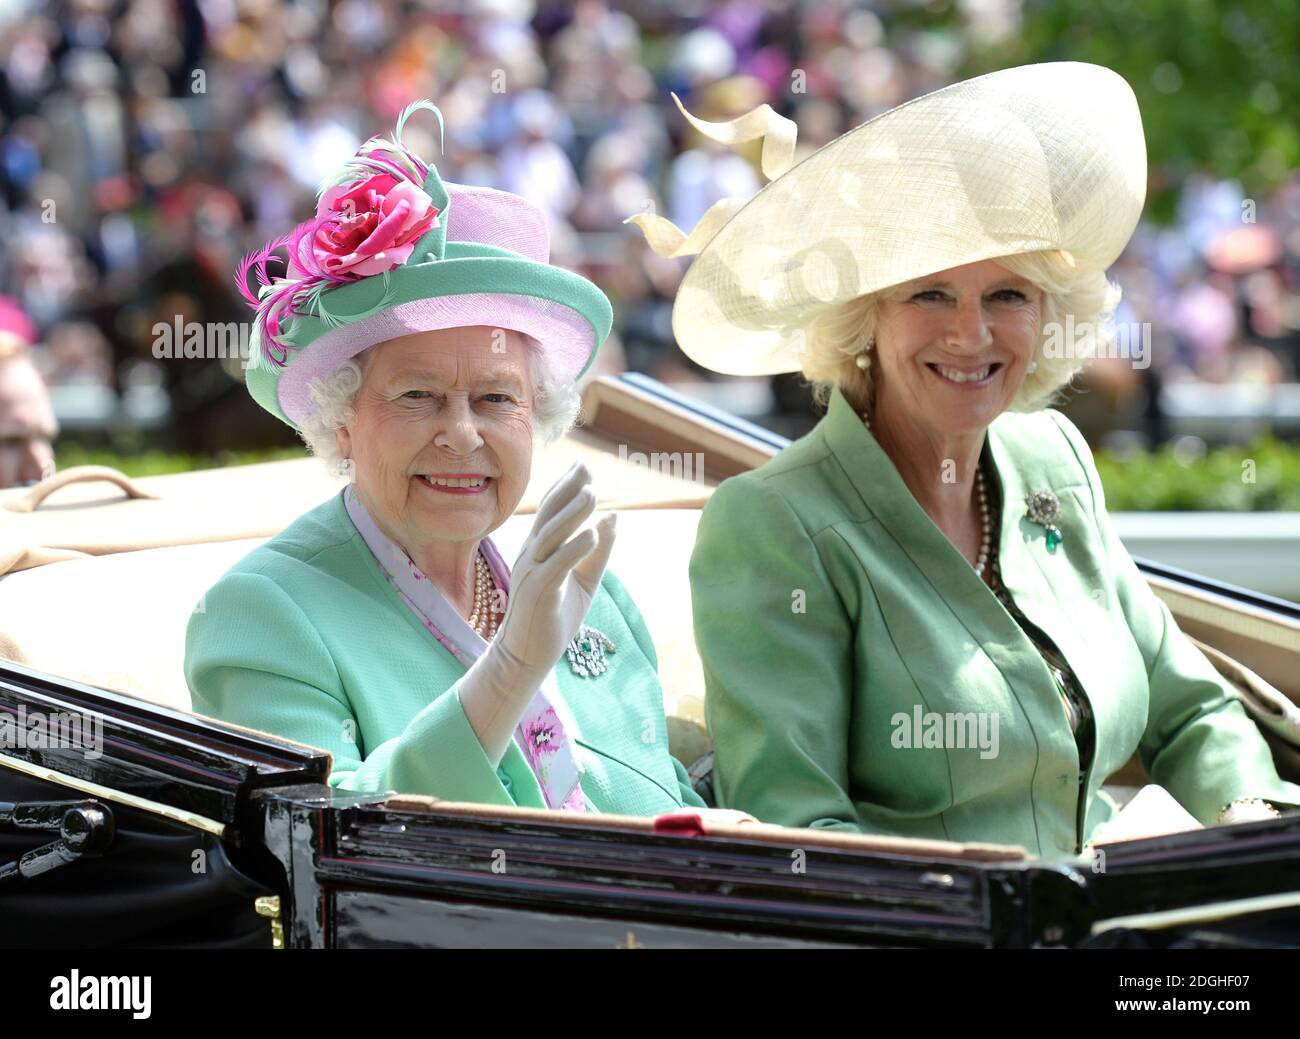 Queen Elizabeth II with Camilla, Duchess of Cornwall at Royal Ascot 2013, Ascot Racecourse, Berkshire. Stock Photo